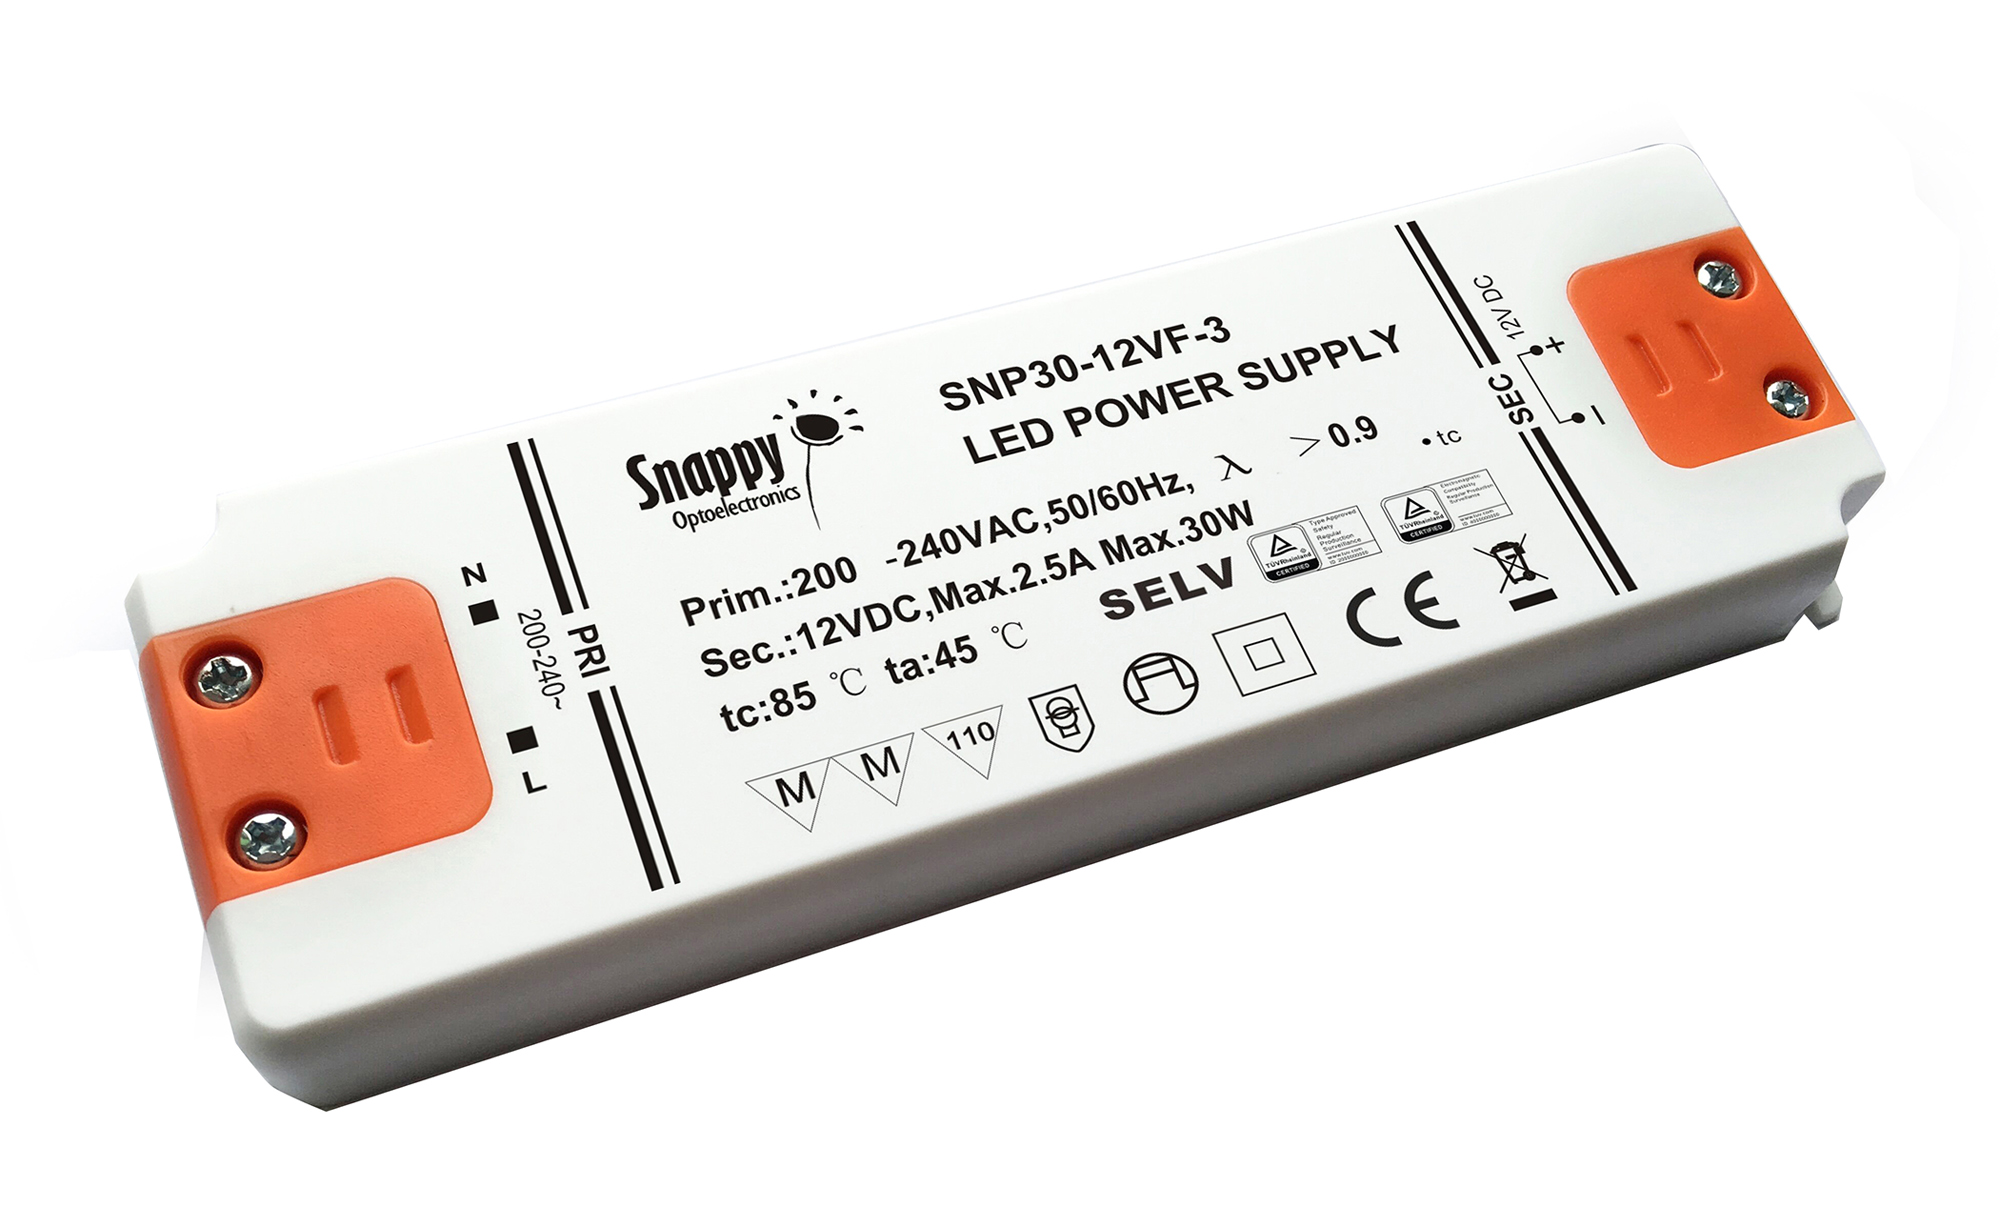 SNP30-12VF-3  30W 150mm x 45mm x 17mm Constant Voltage Non-Dimmable LED Driver 12VDC 2.5A IP20